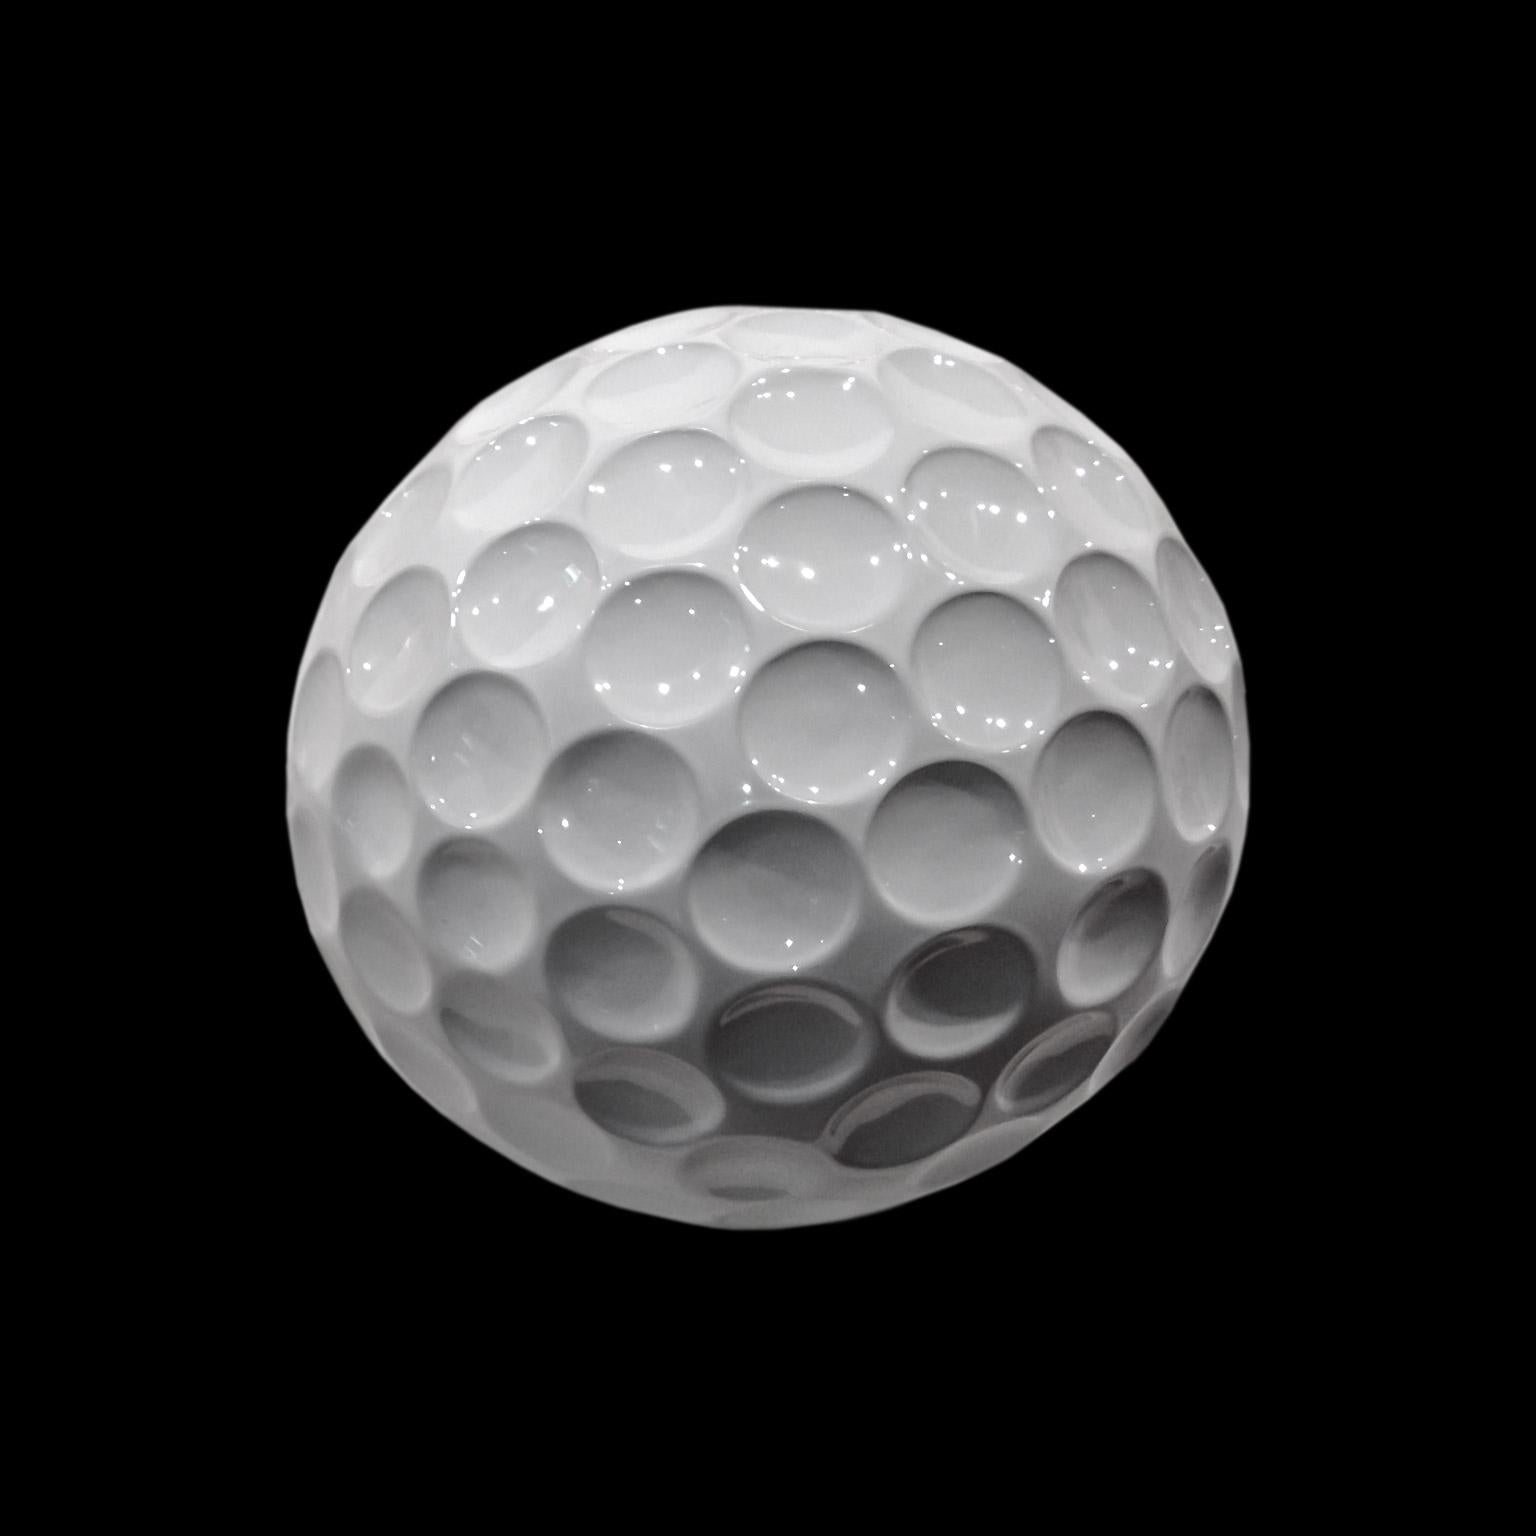 Ceramic golf ball handcrafted in white enamel
Albatros - code GB040, measures: H 40.0, Dm 40.0 cm.

Finishes:
- fully finished in 24 carat gold, platinum or bronze € 1.050,00

Also available in a smaller size : Dm 15 cm.

Please do not hesitate to